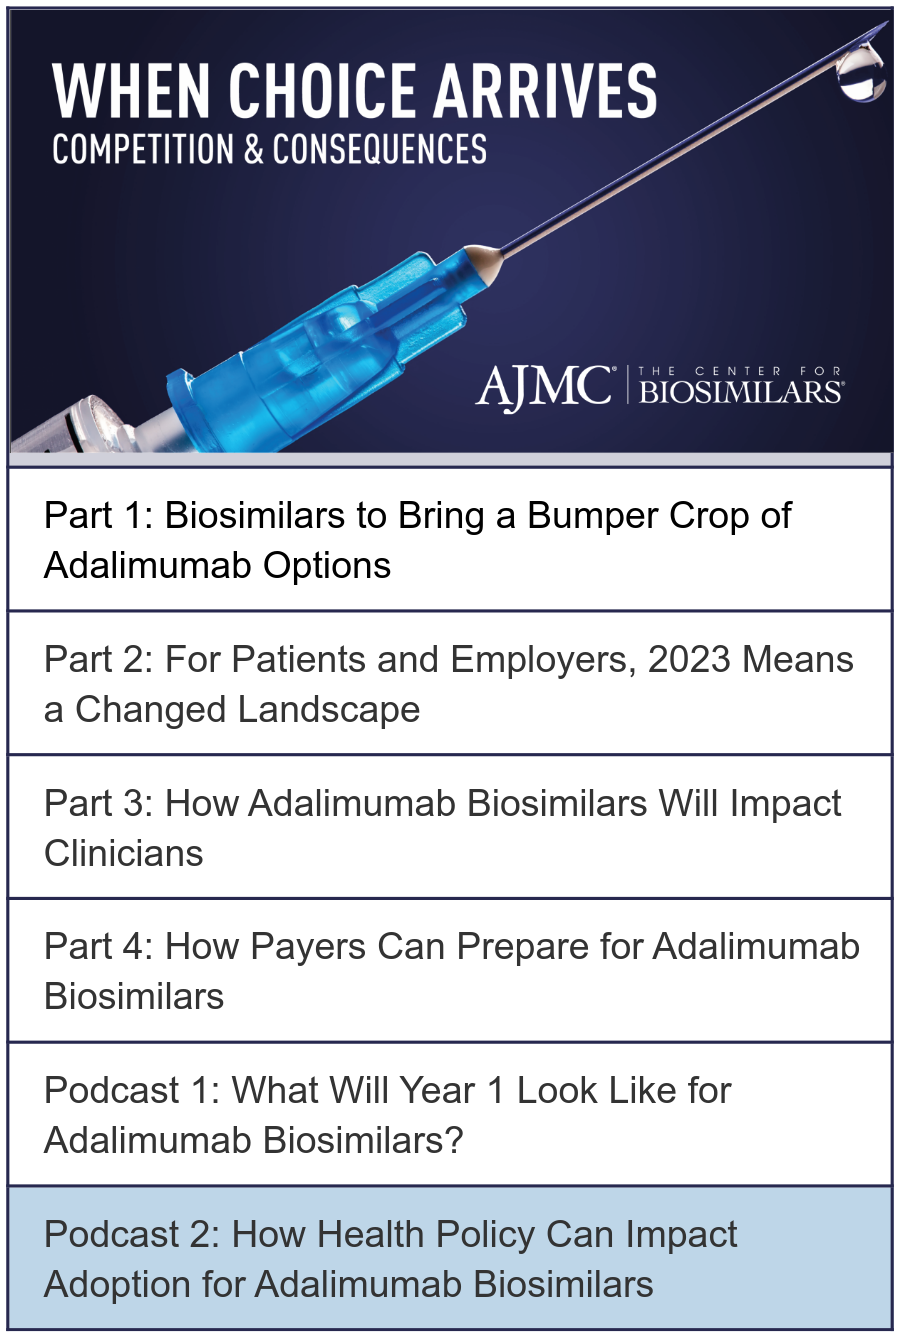 "When Choice Arrives: Competition & Consequences" written over a bright blue syringe with the AJMC/The Center for Biosimilars logo in the bottom right corner. Under the image is a list of 6 items (4 article titles and 2 podcasts). The second podcast item is highlighted.